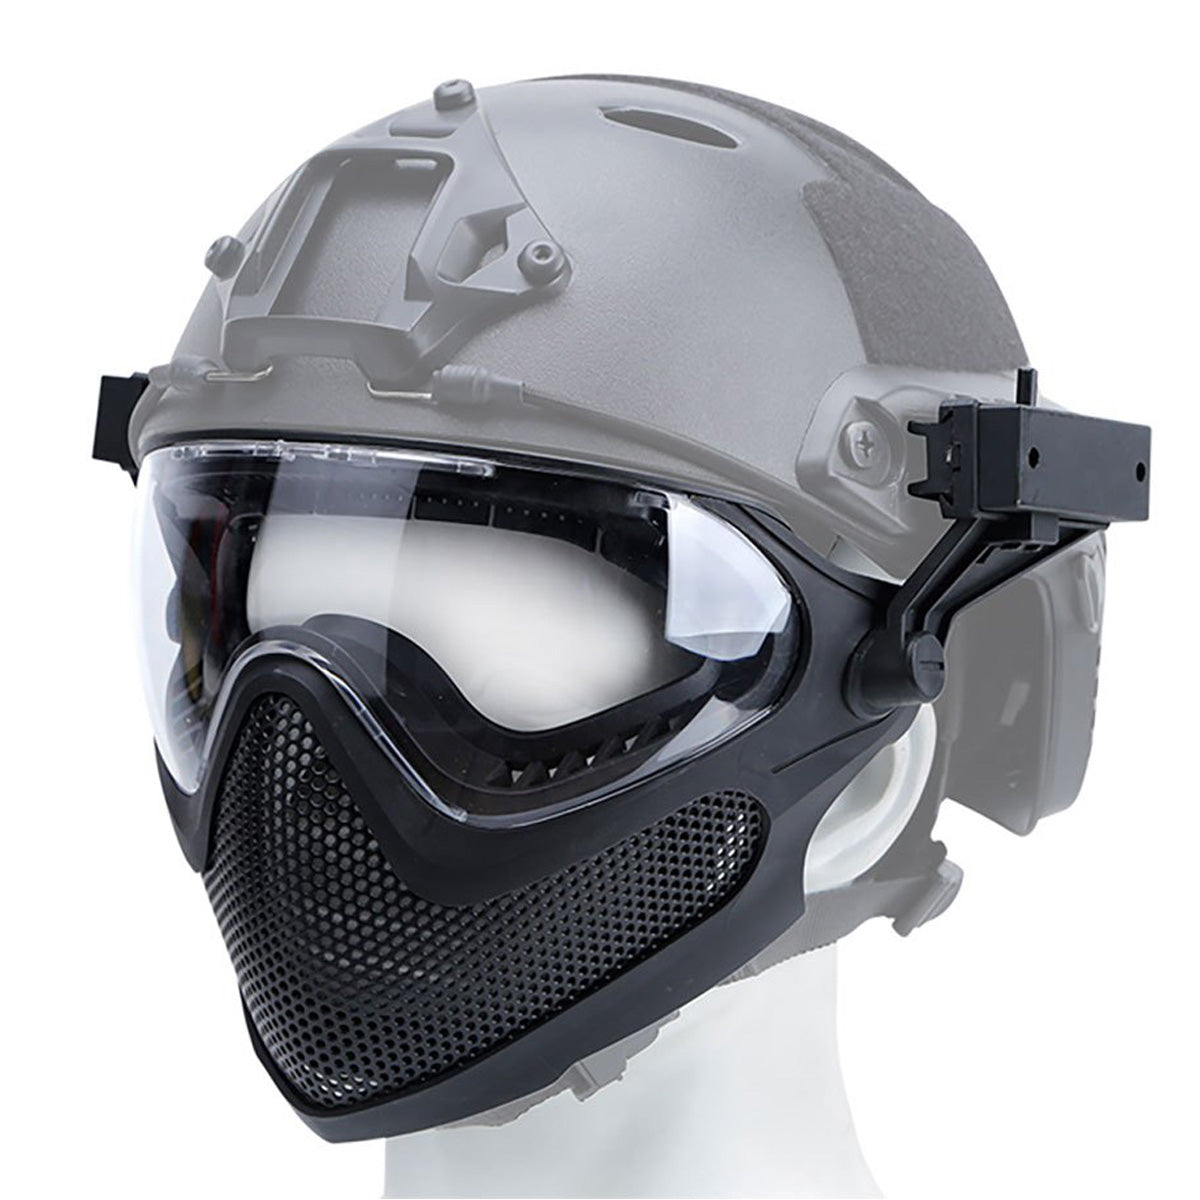 WOSPORT PILOT MASK STEEL MESH VERSION FOR AIRSOFT